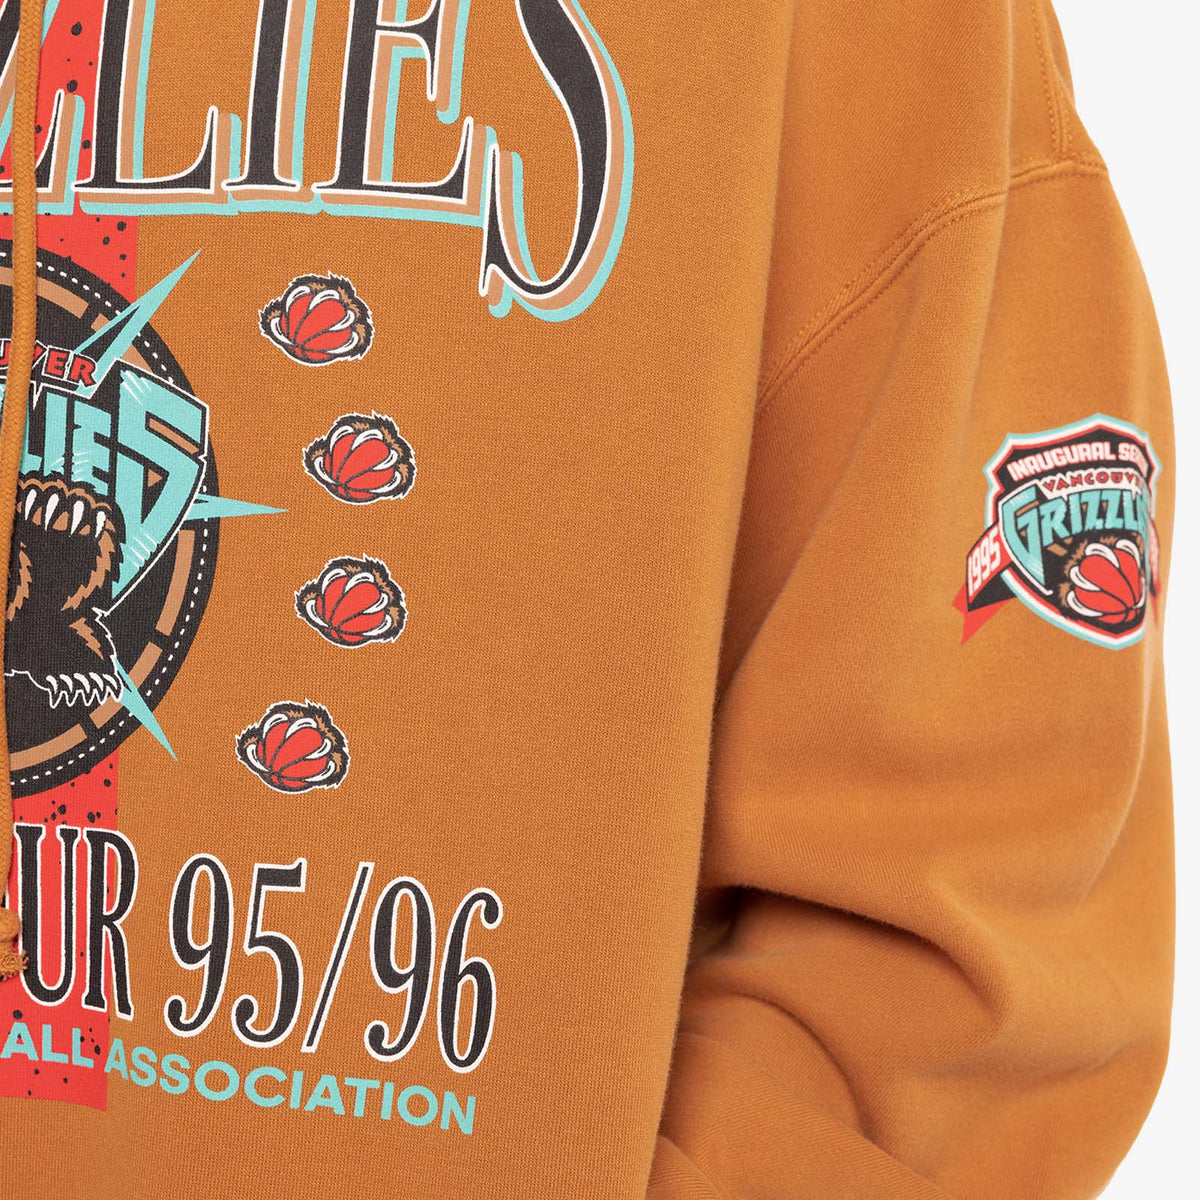 Vancouver Grizzlies 95/96 World Tour Hoodie - Brown